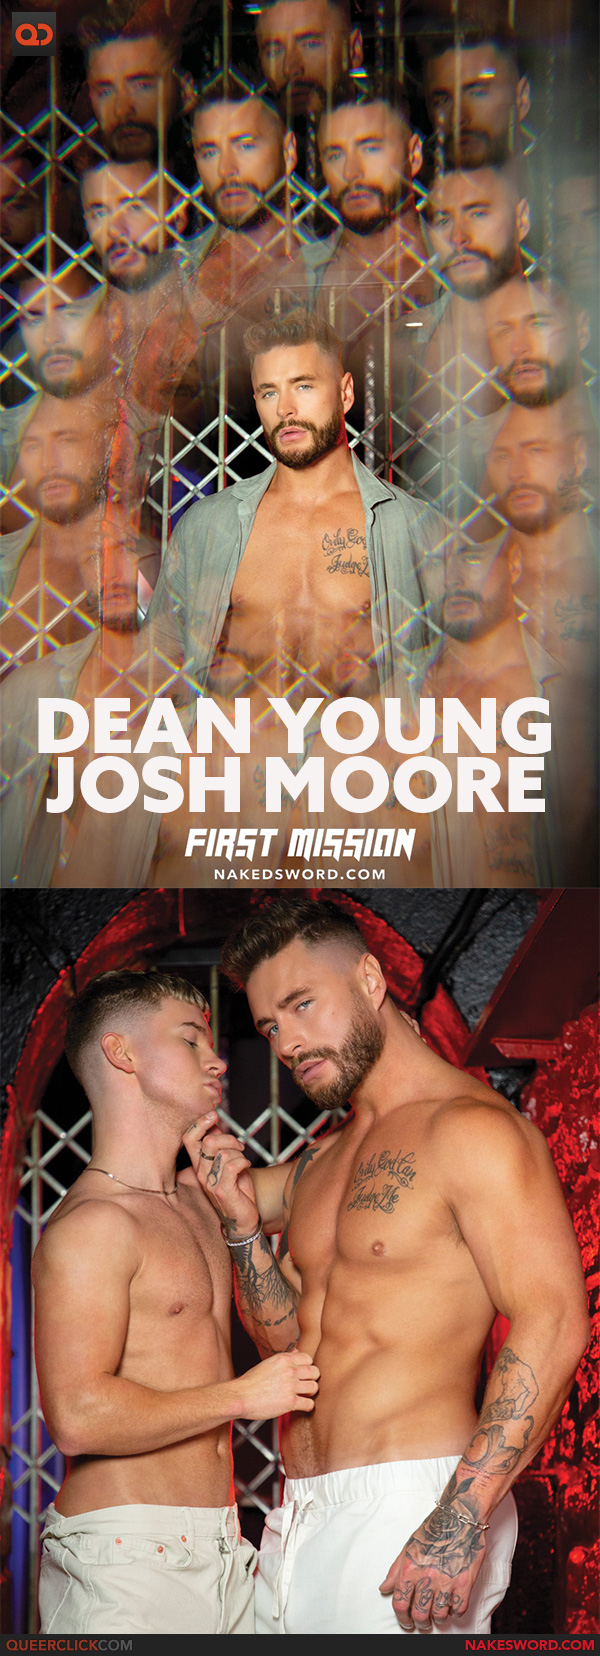 Naked Sword: Josh Moore and Dean Young - First Mission Scene 3